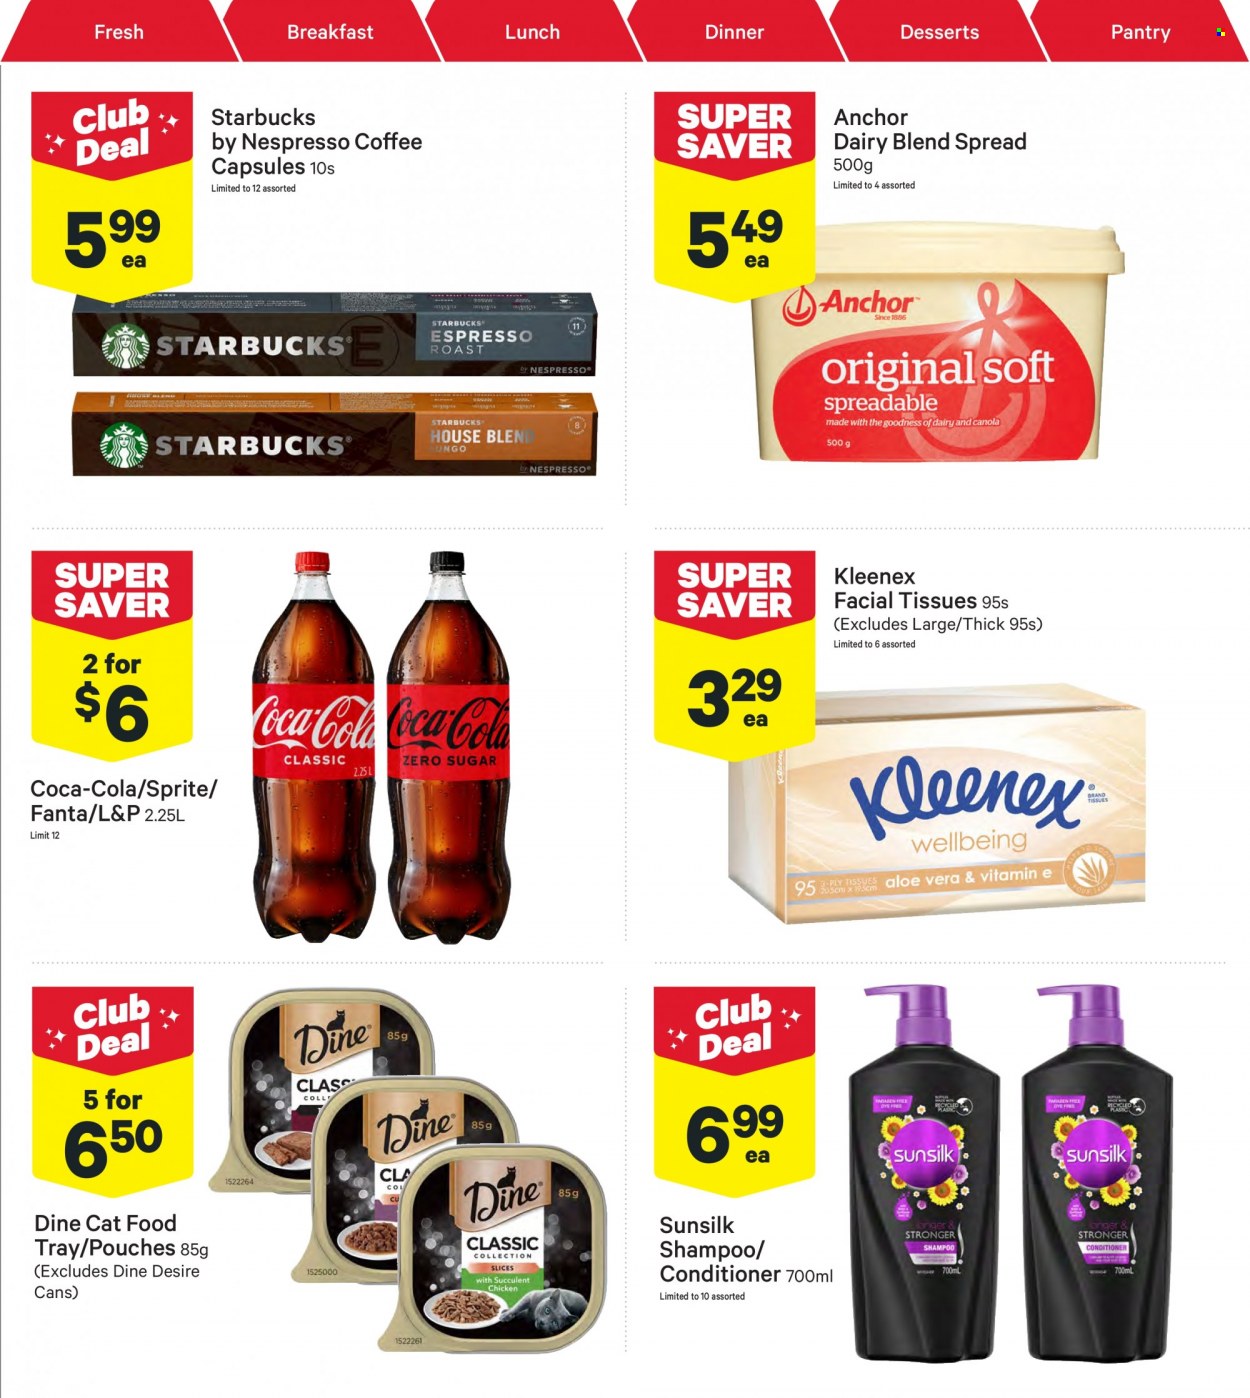 thumbnail - New World mailer - 27.03.2023 - 02.04.2023 - Sales products - roast, dairy blend, Anchor, Coca-Cola, Sprite, Fanta, L&P, coffee, Nespresso, coffee capsules, Starbucks, chicken, Kleenex, tissues, shampoo, Sunsilk, facial tissues, conditioner, animal food, cat food. Page 3.